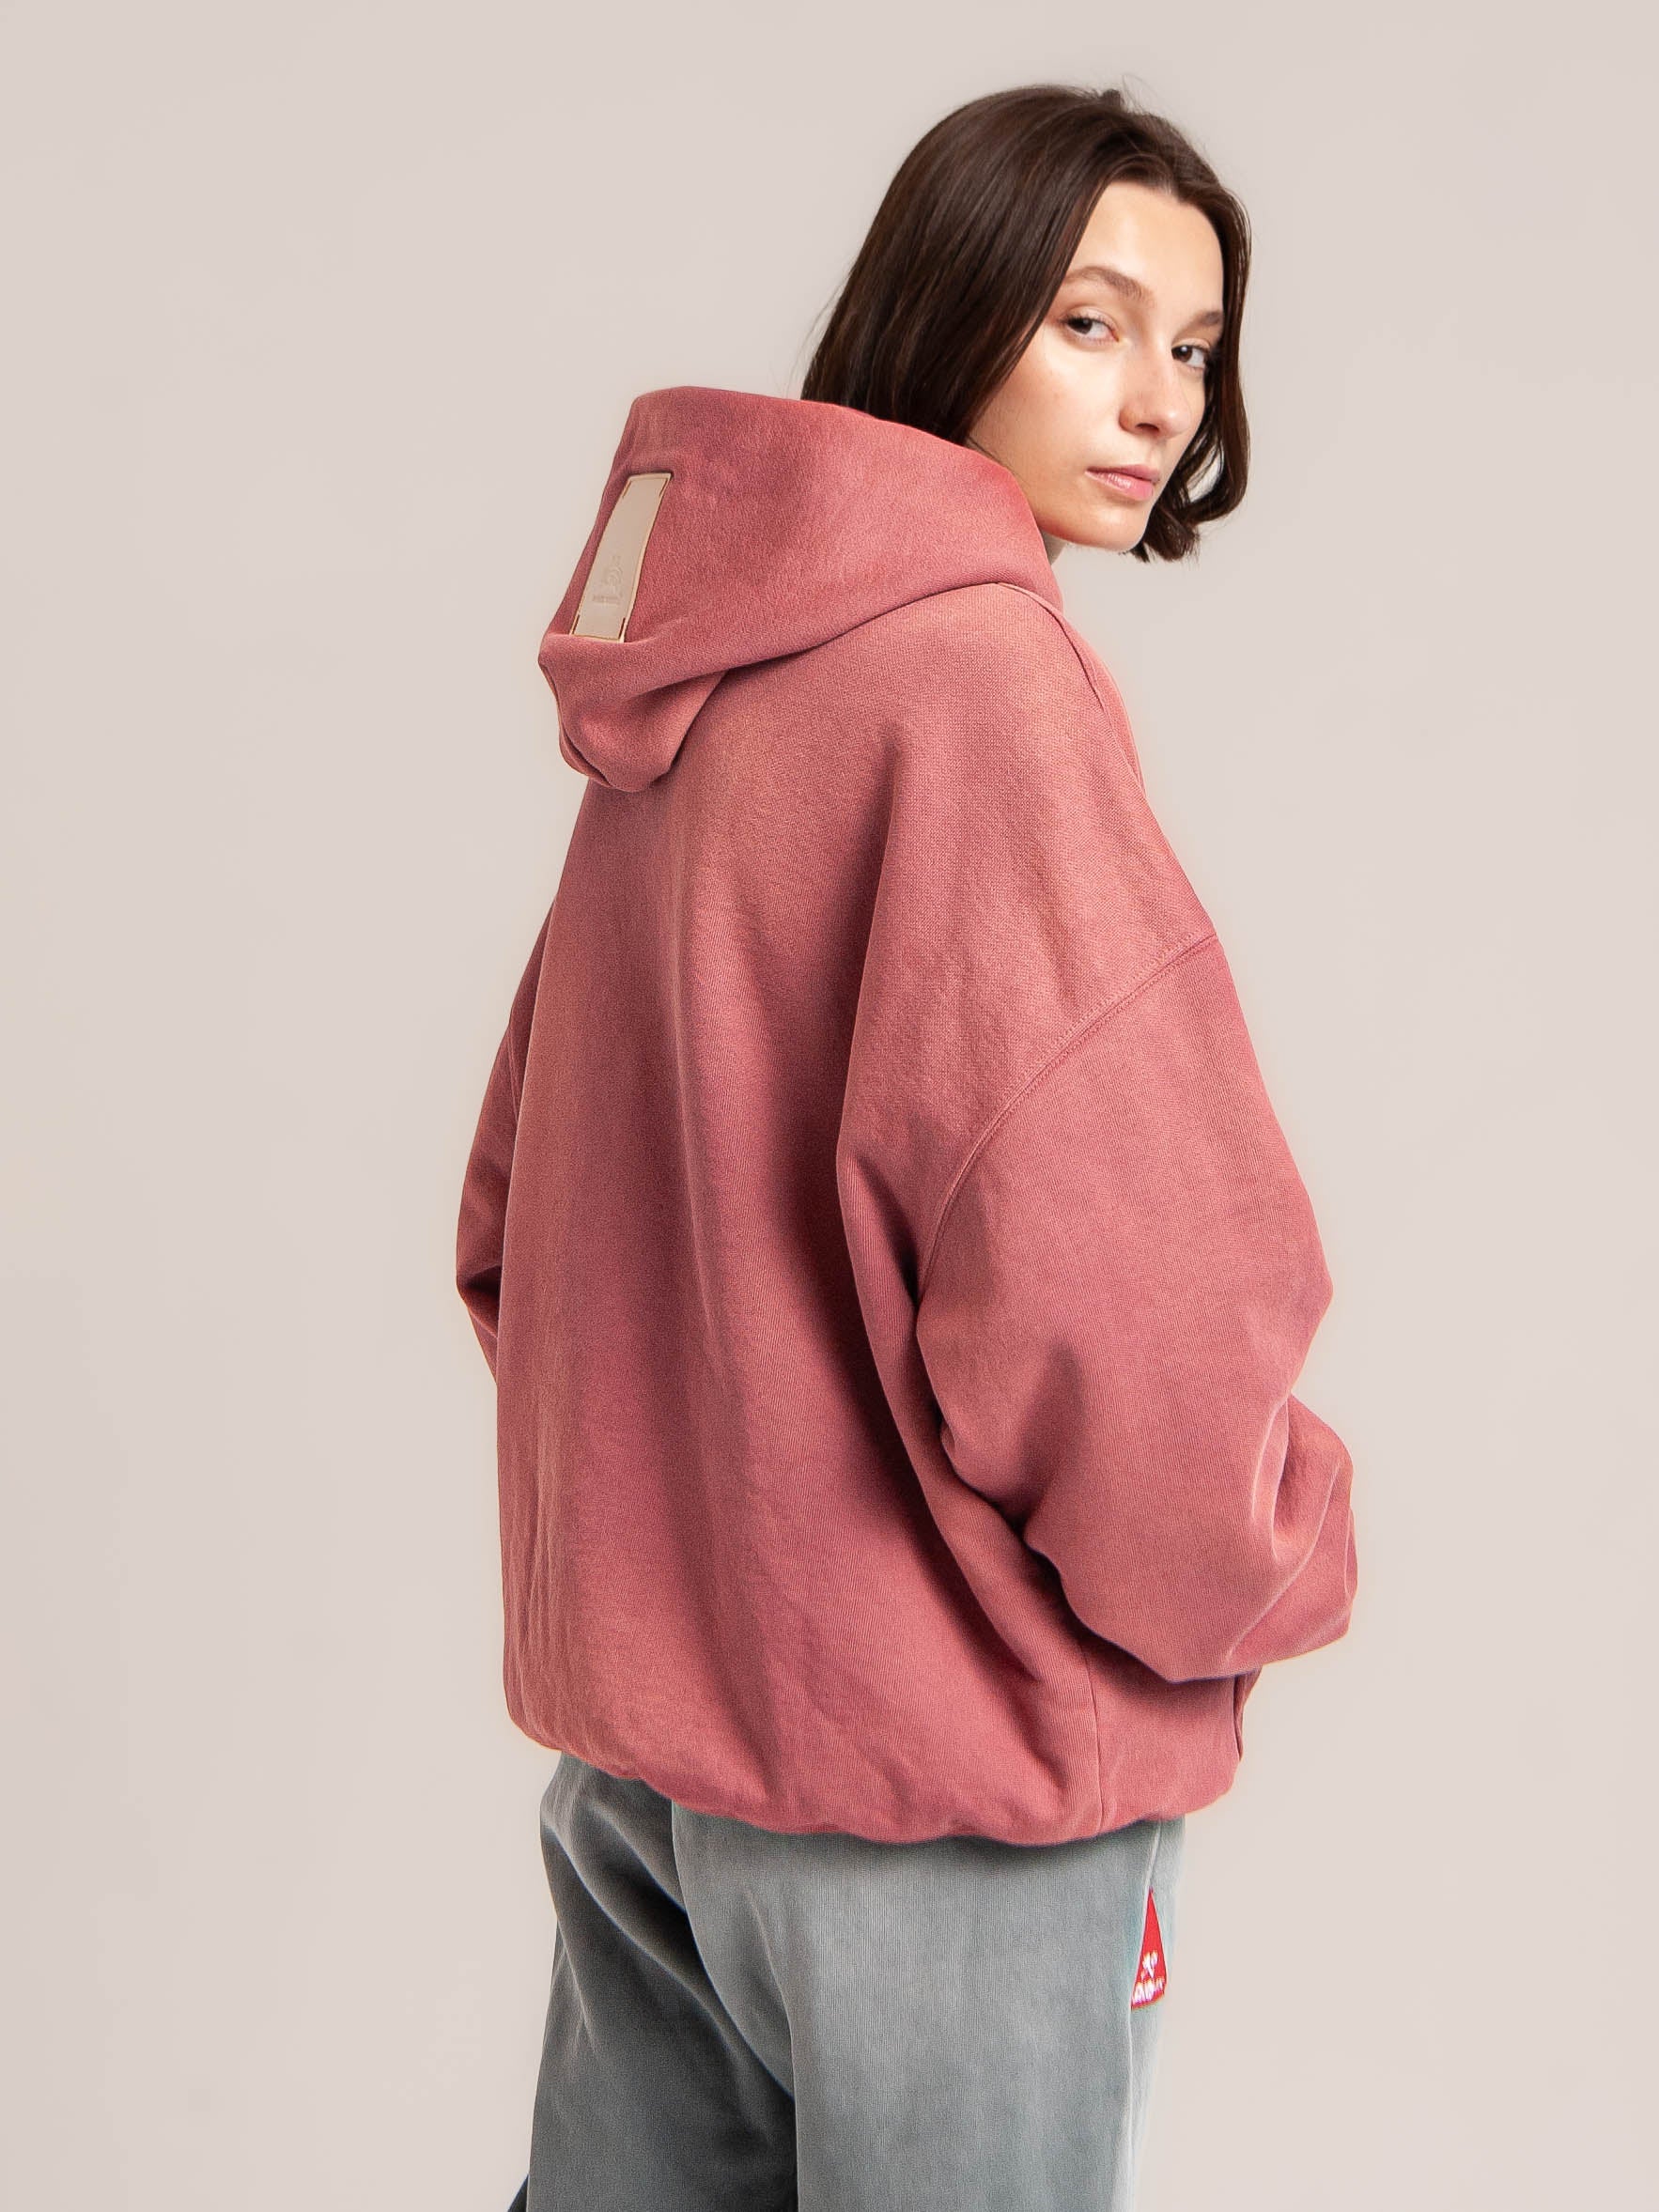 female model wears Publik Brand Double Layered Hoodie Tea Rose Red Heavyweight Fleece, all made in USA and turn around